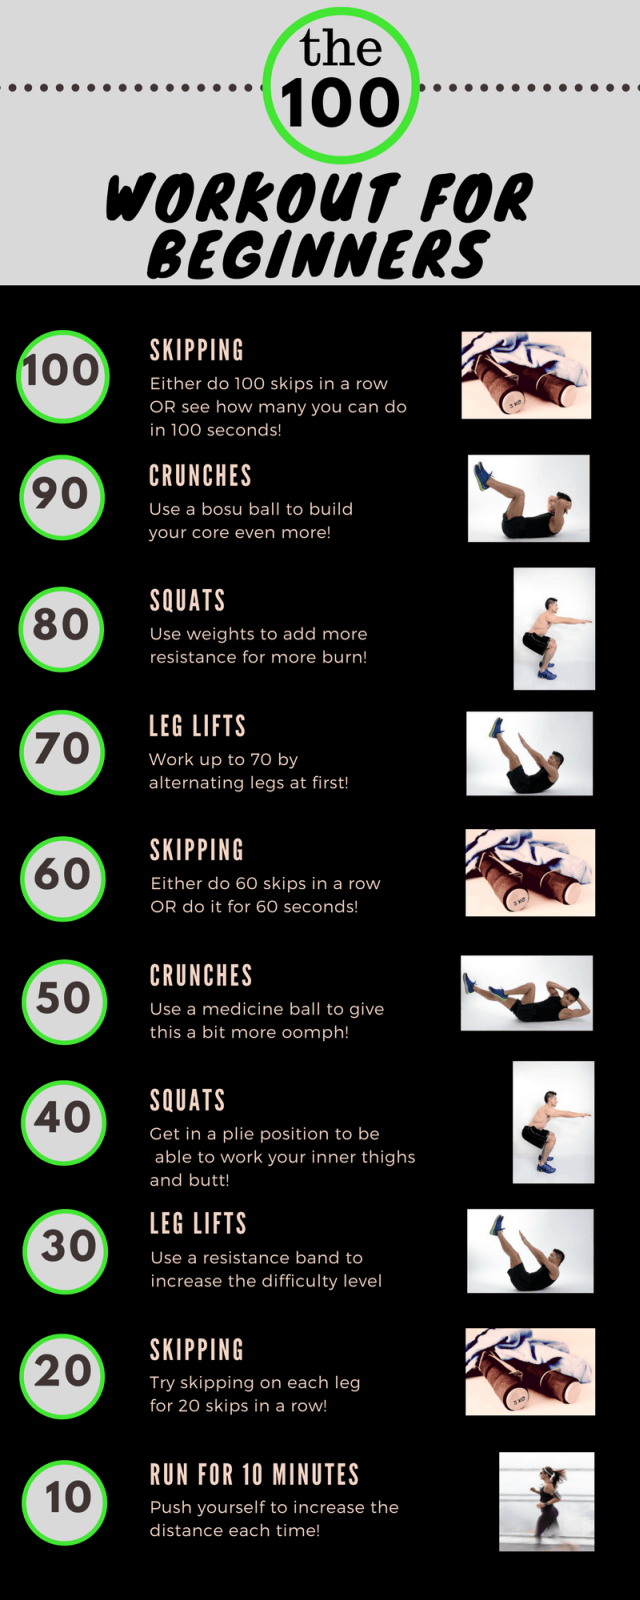 The 100 workout for beginners